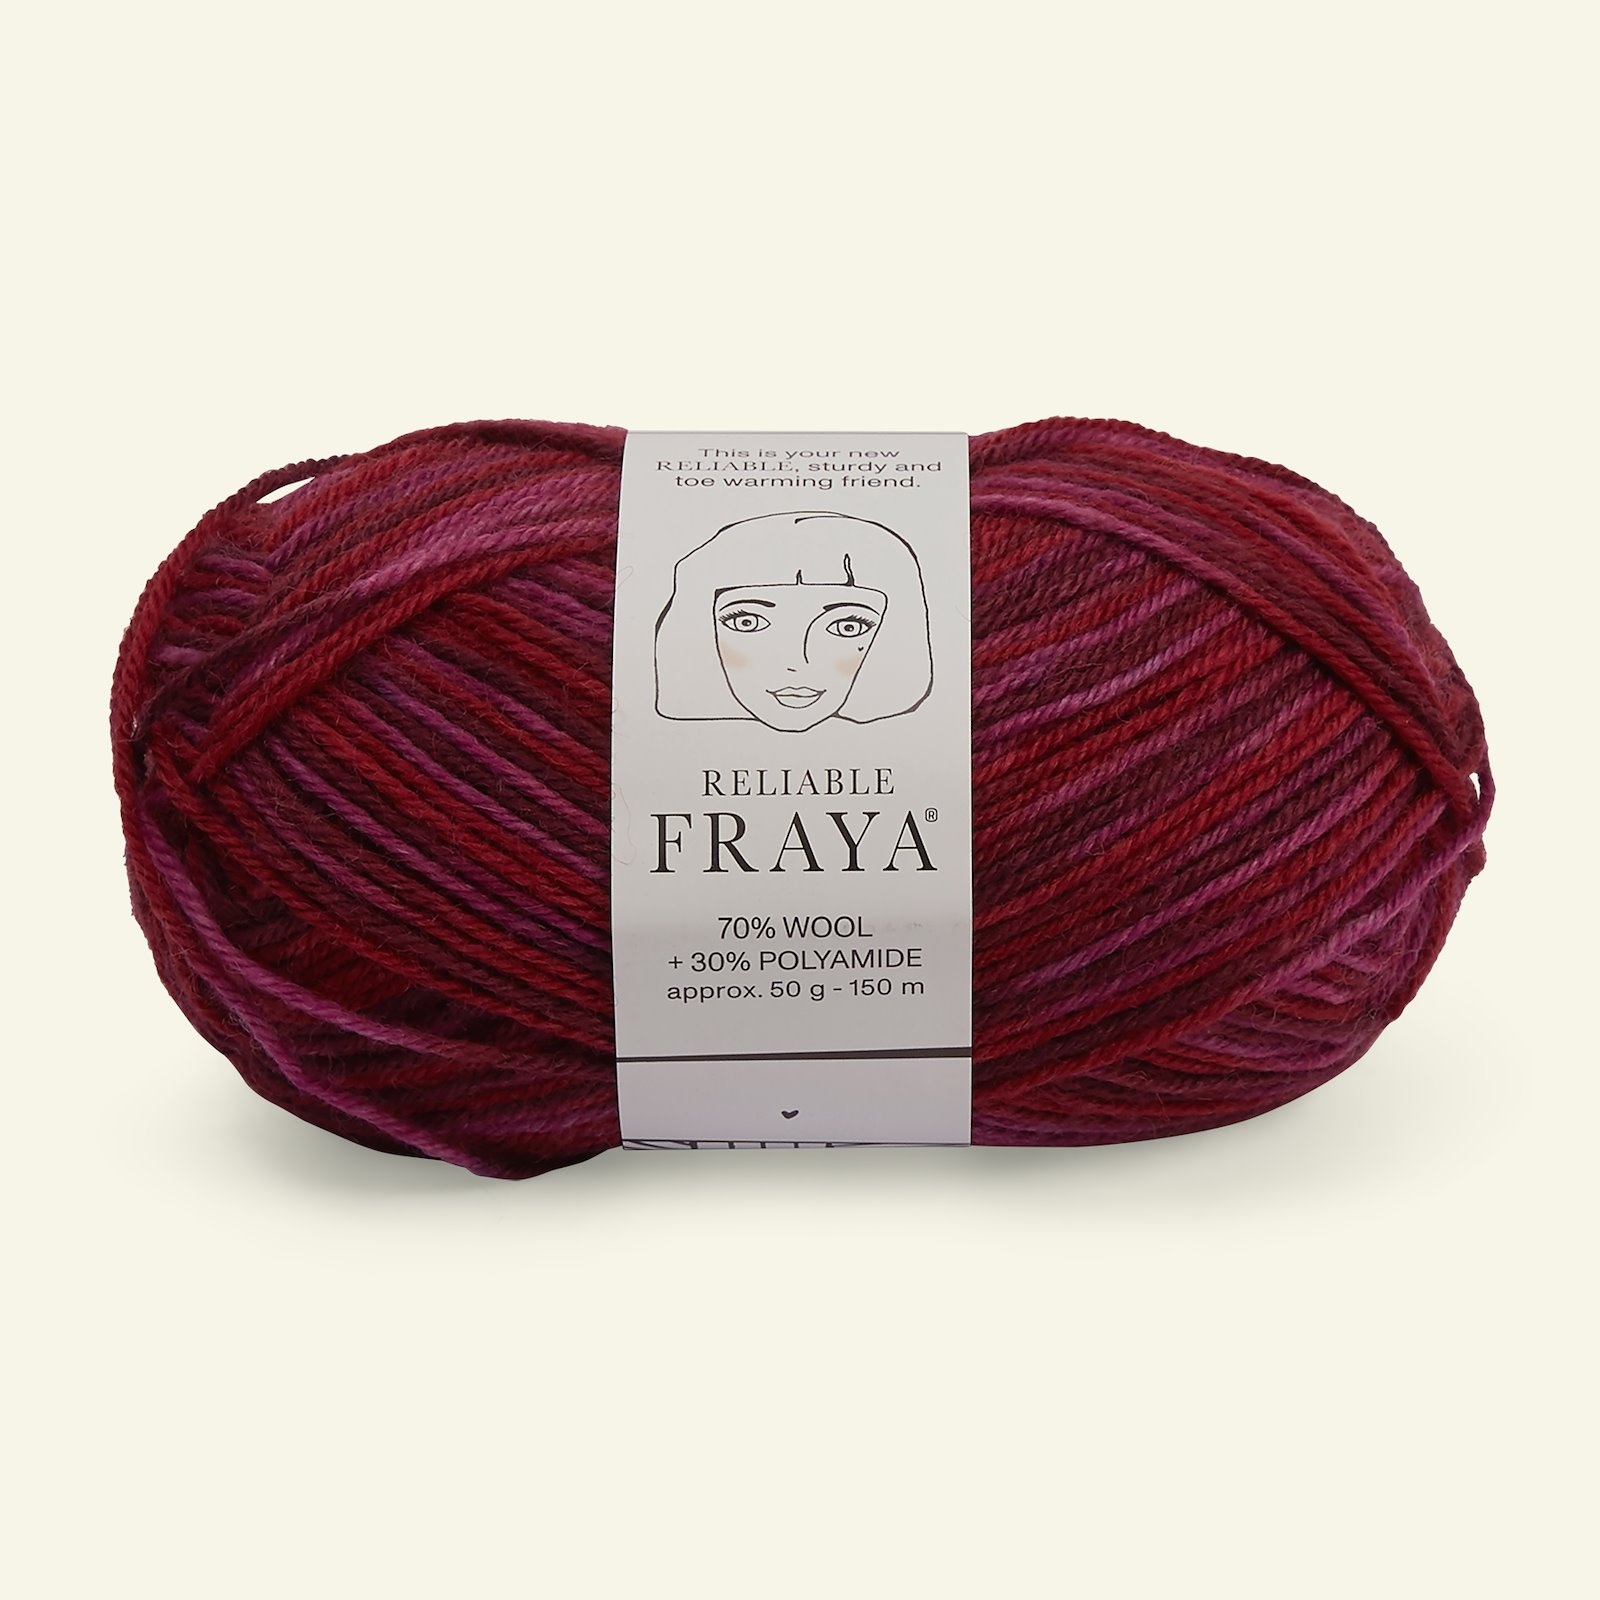 FRAYA, wool yarn "Reliable", pink/red mix col. 90001193_pack